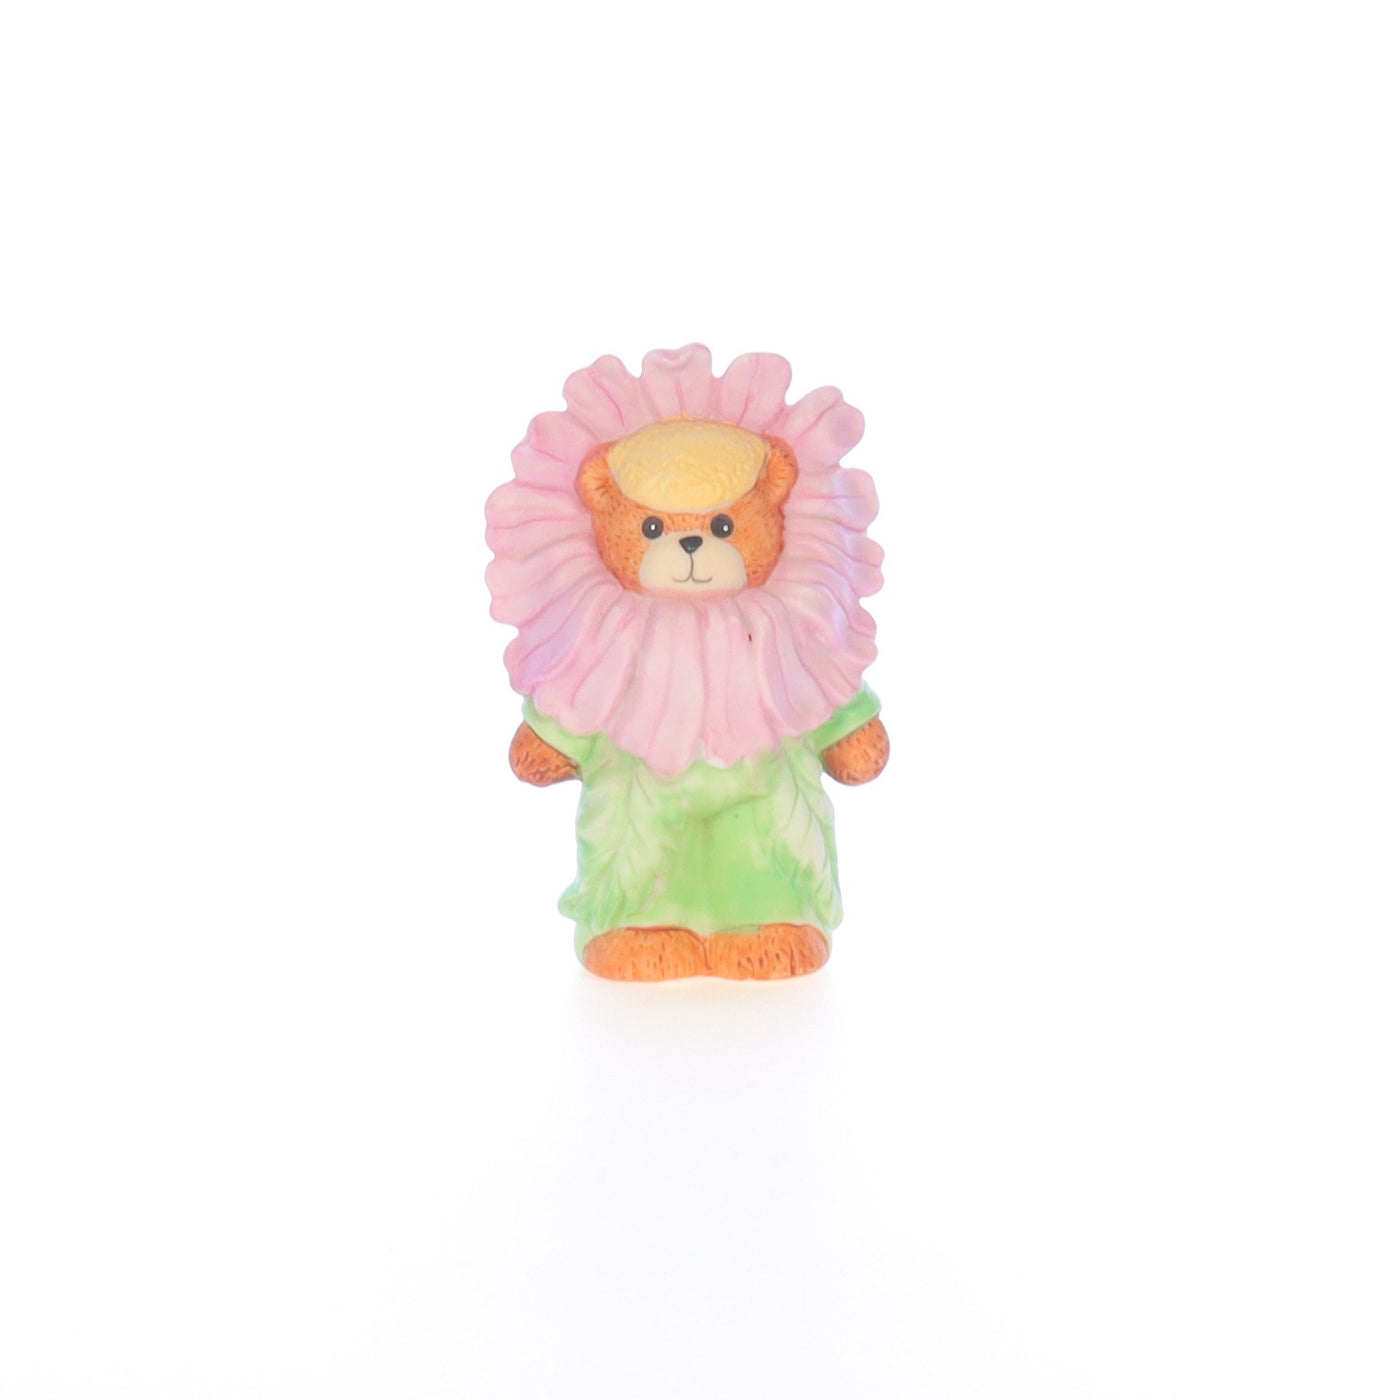 Lucy_And_Me_by_Lucy_Atwell_Porcelain_Figurine_Bear_with_Pink_and_Green_Flower_Costume_Lucy_Unknown_012_01